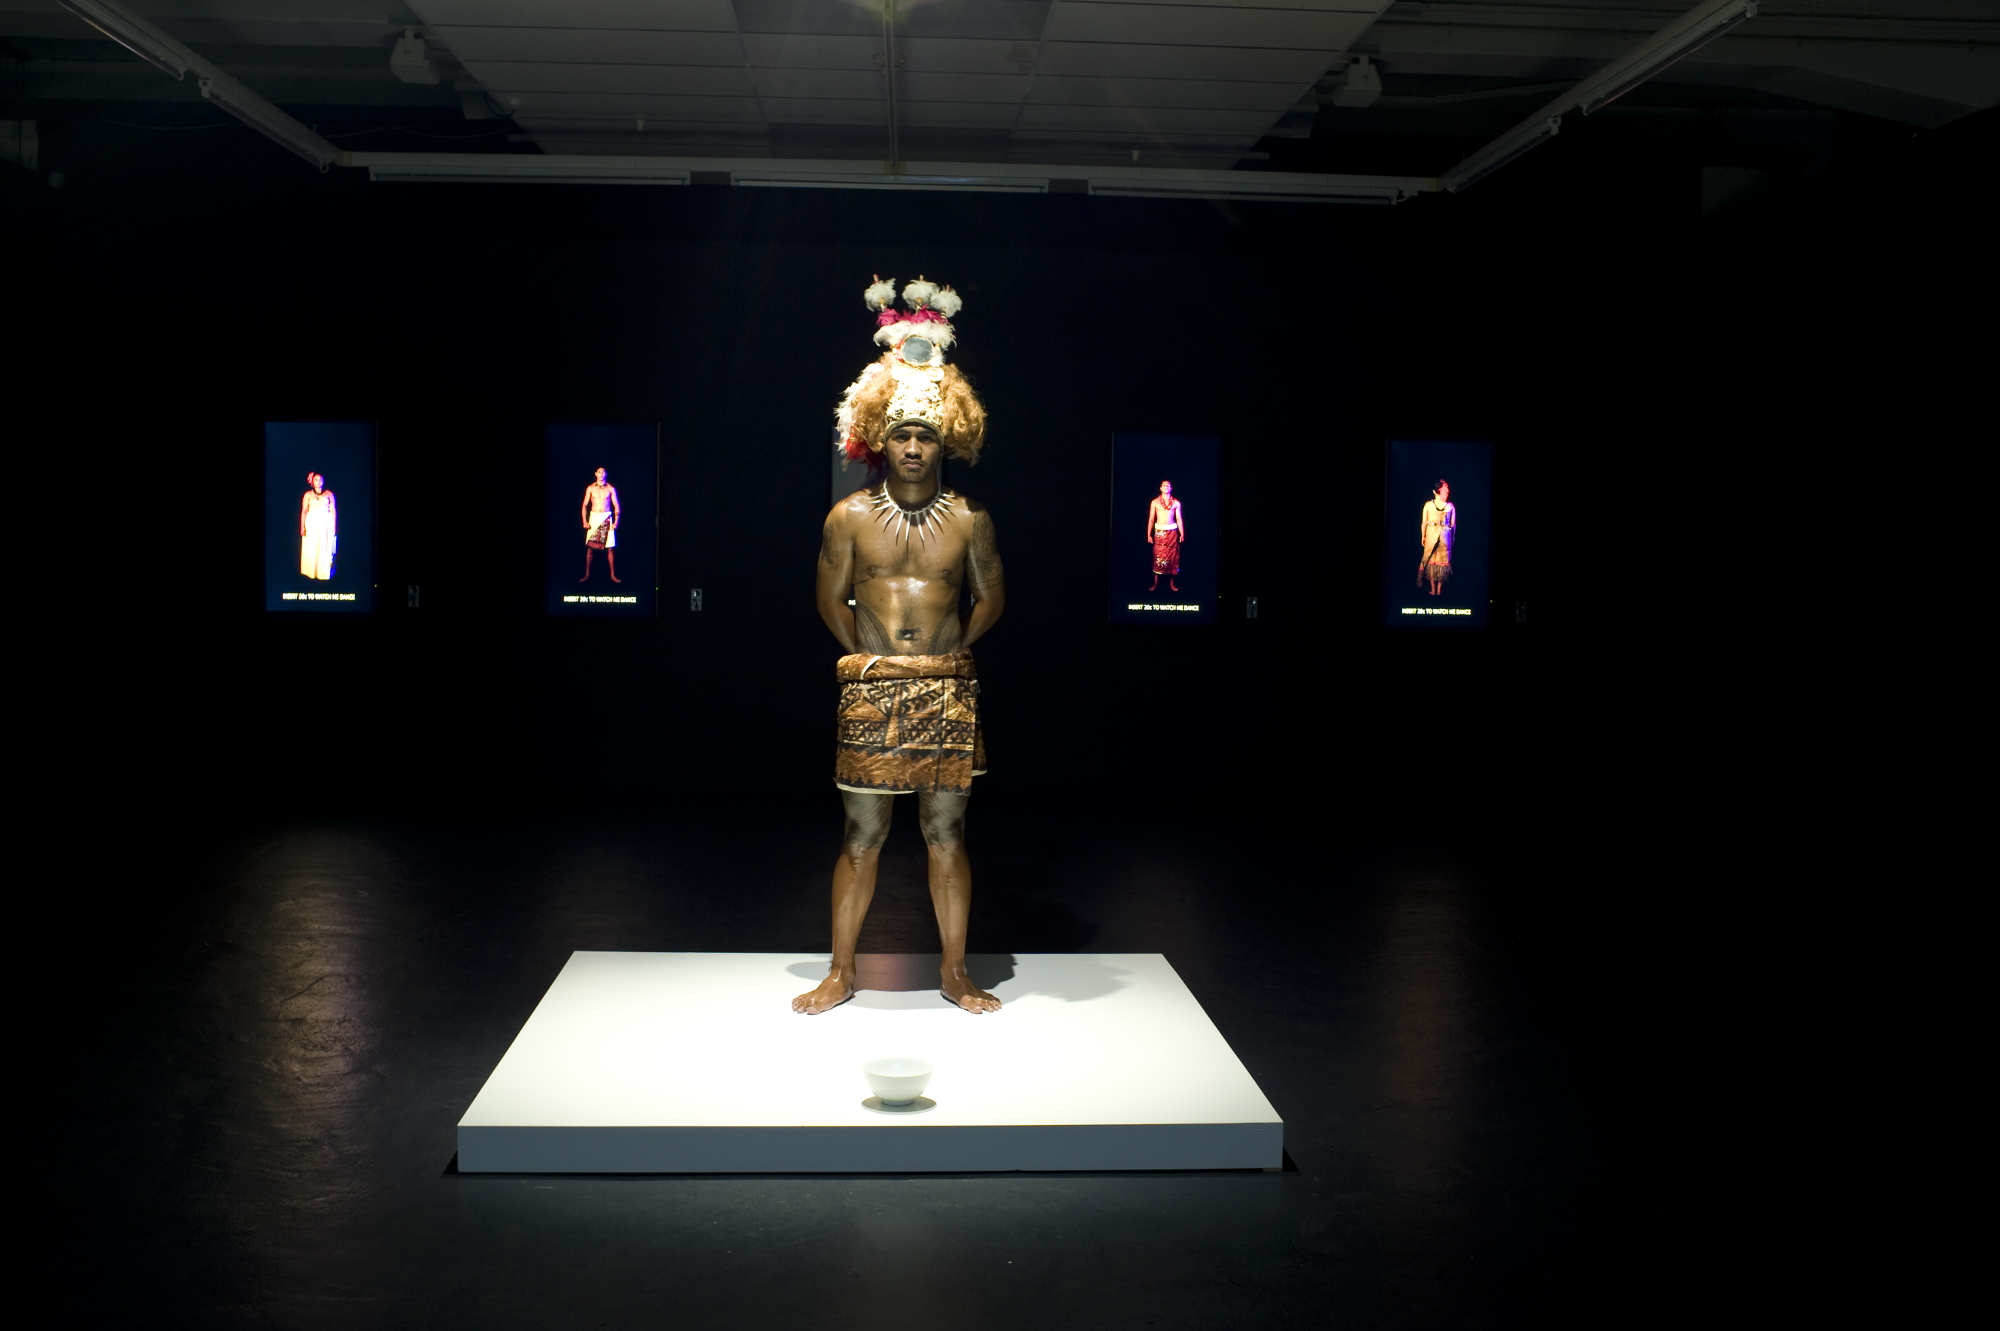 Yuki Kihara, <em>Culture for Sale</em>, 2014, still from performance at City Gallery Wellington, NZ. Image courtesy and © the artist. Photo: Sarah Hunter.